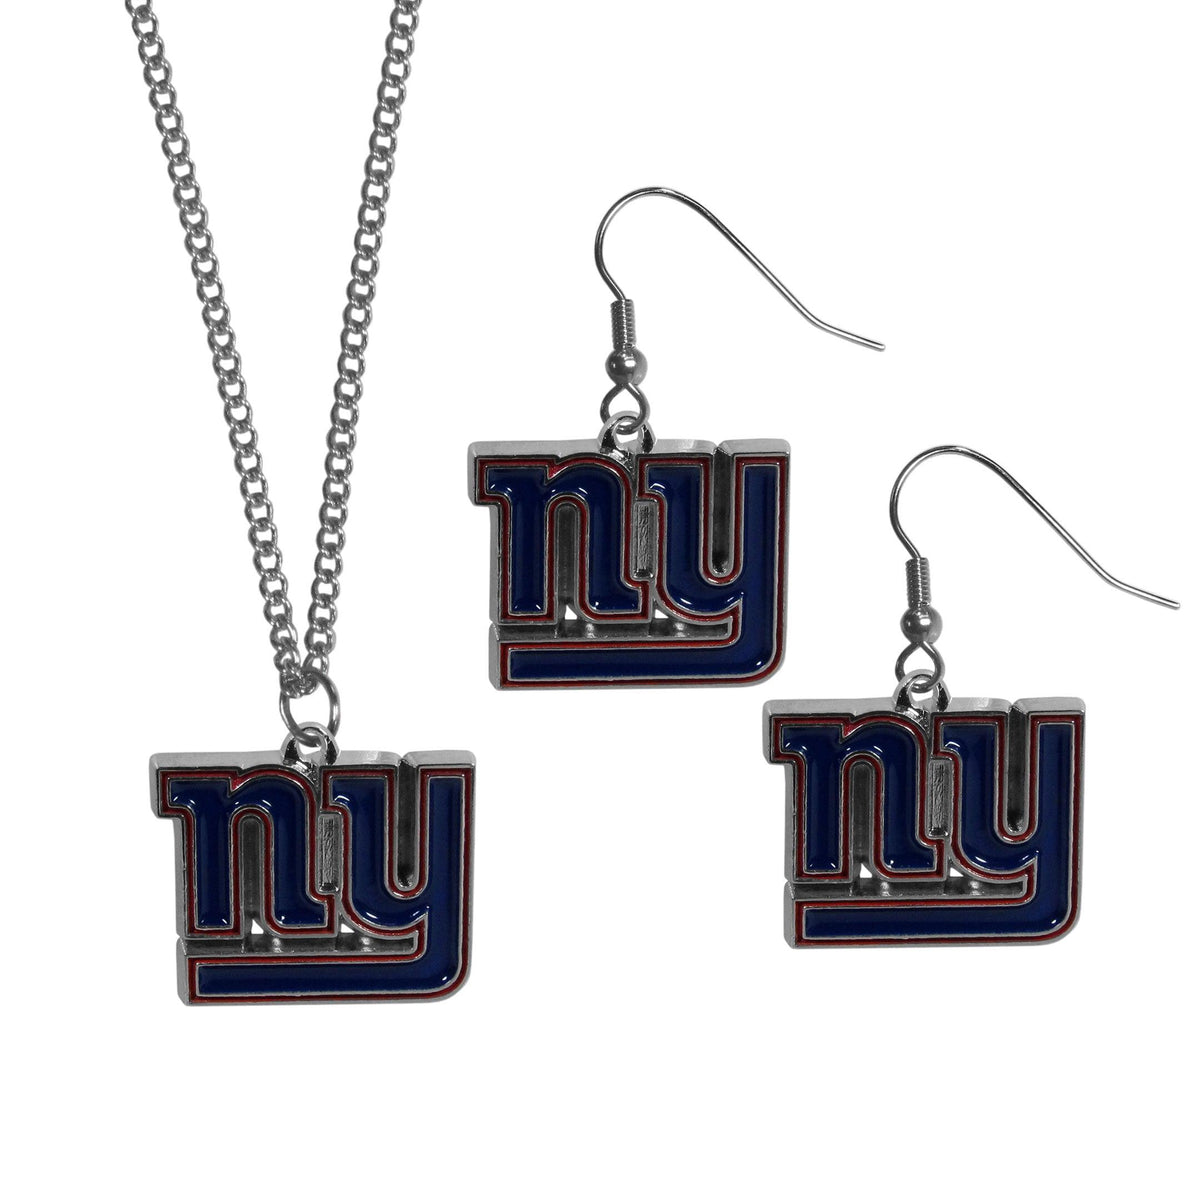 New York Giants Dangle Earrings and Chain Necklace Set - Flyclothing LLC